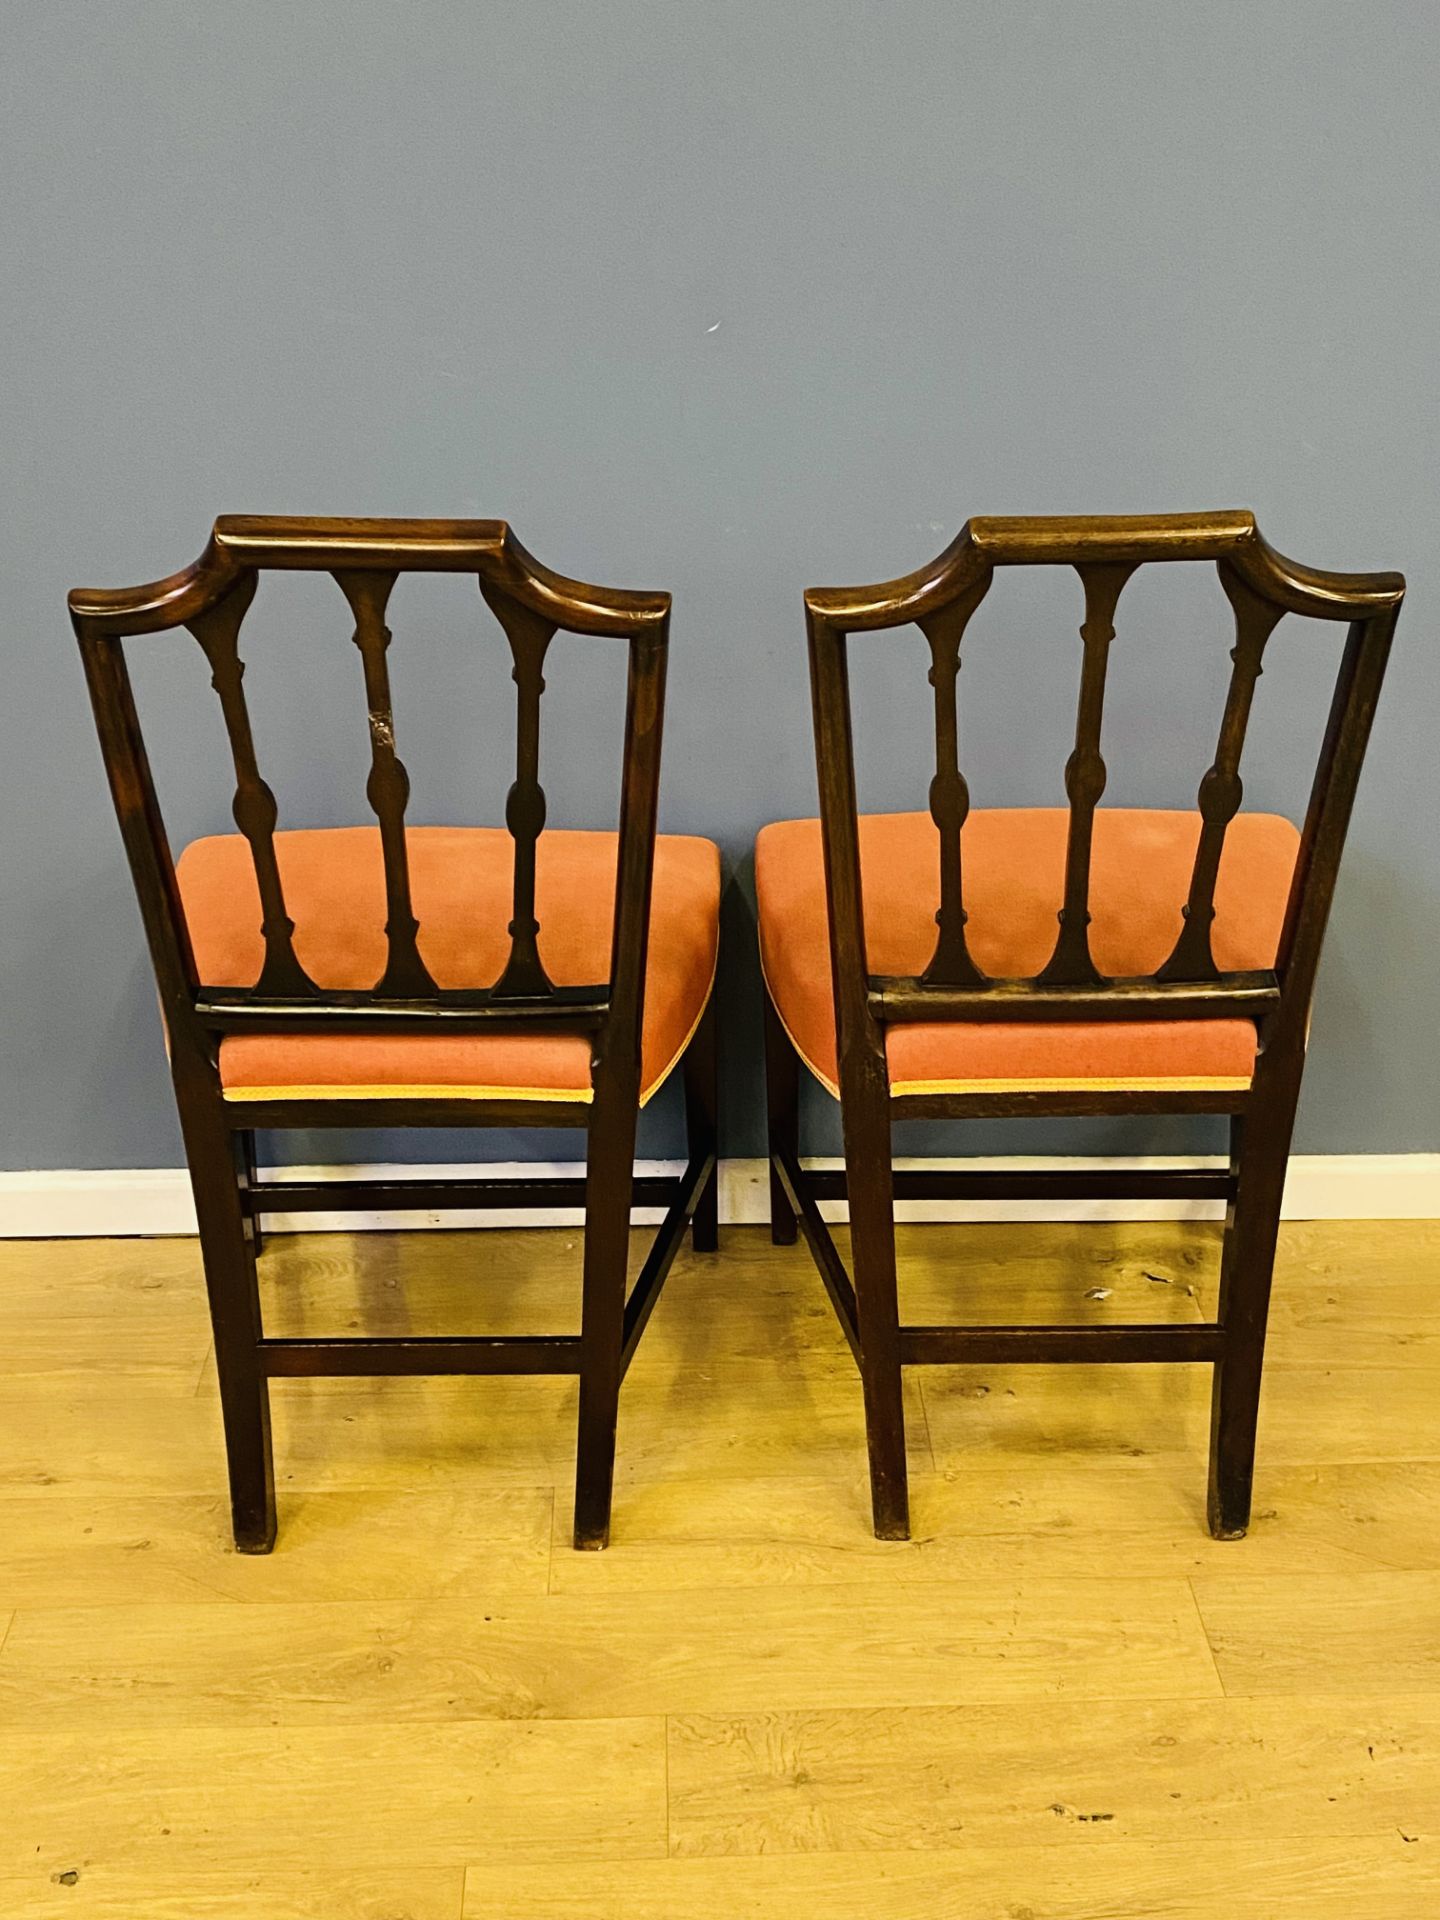 Pair of 19th century mahogany side chairs - Image 5 of 6